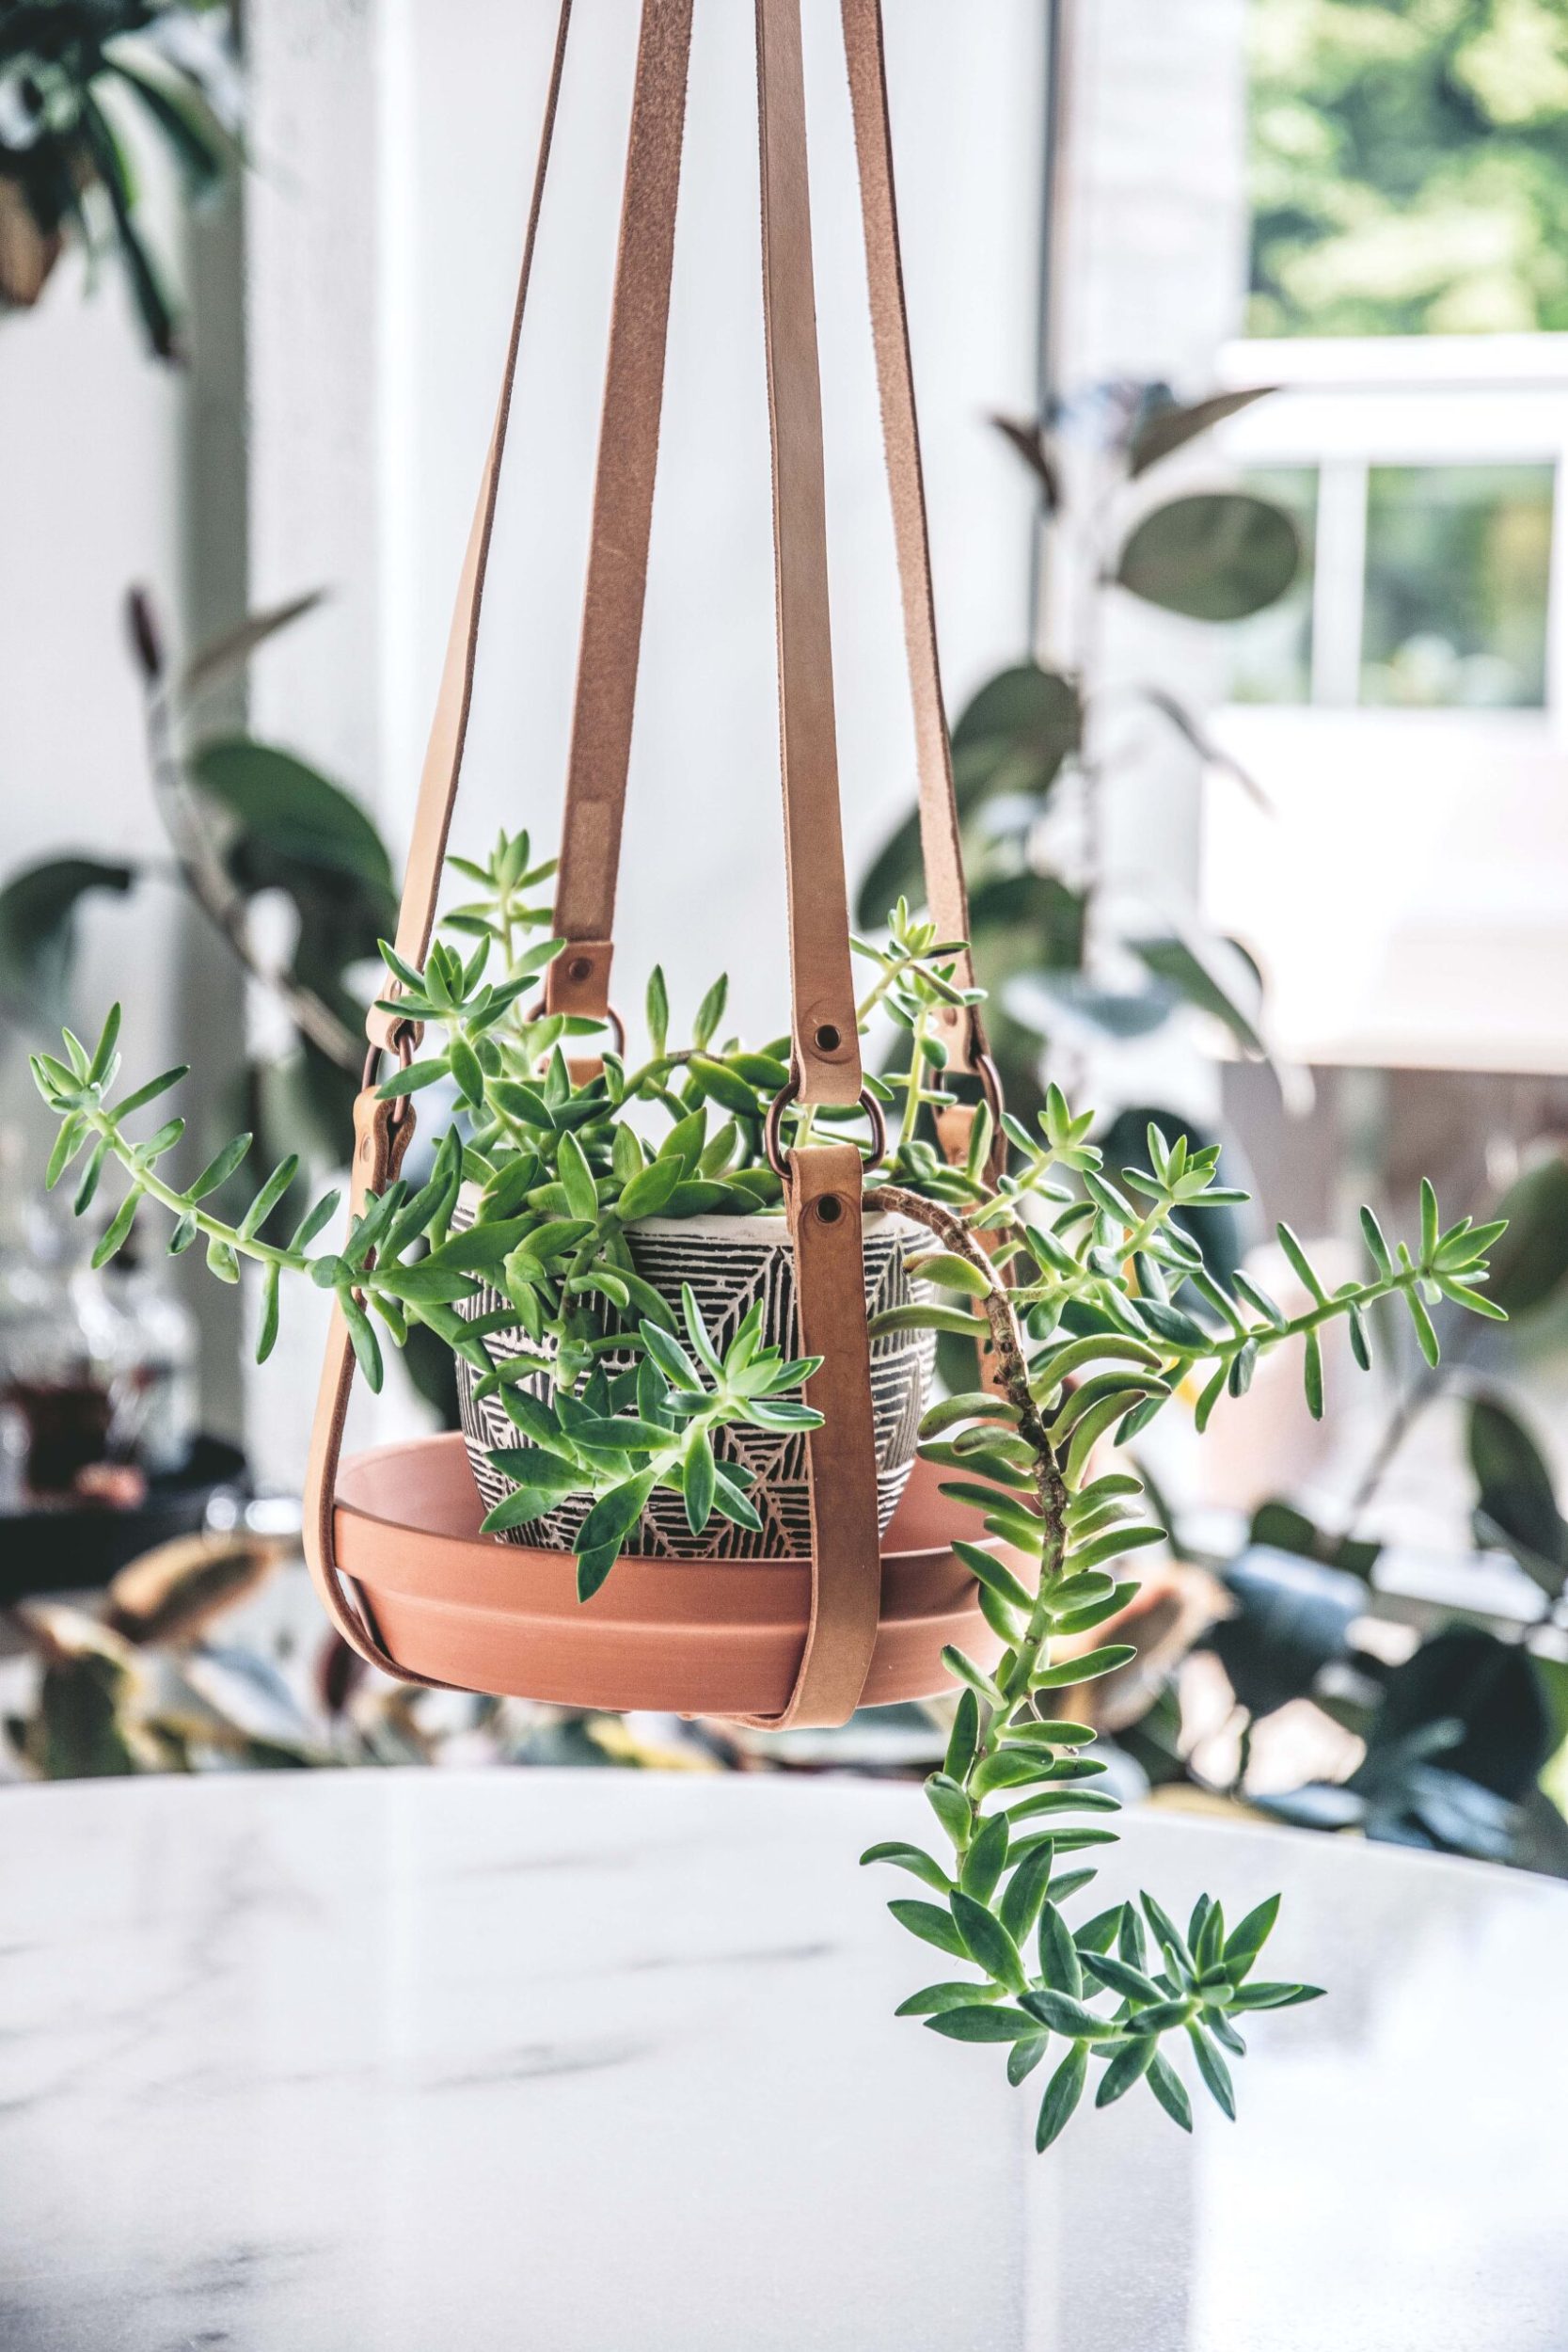 Plant sitting on DIY leather and ceramic hanging planter